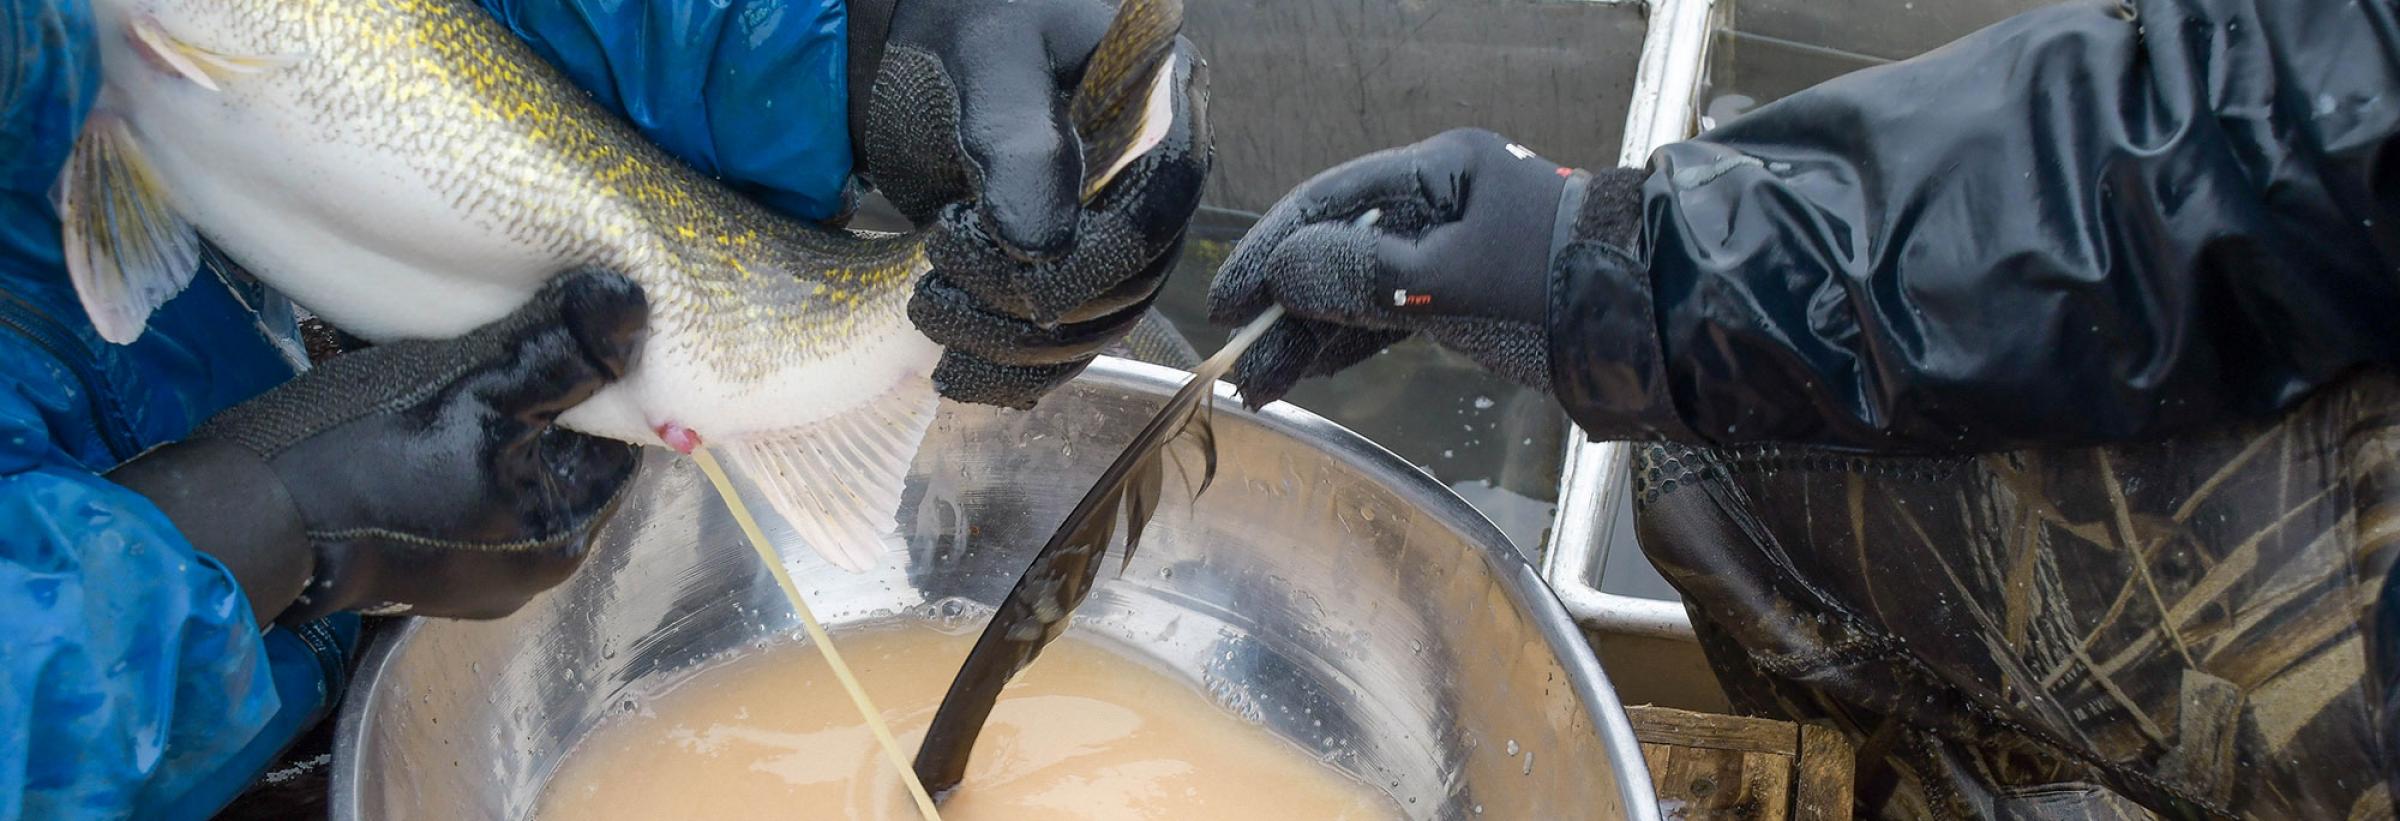 Walleye eggs from females and milt from males are mixed with a feather in a bowl.